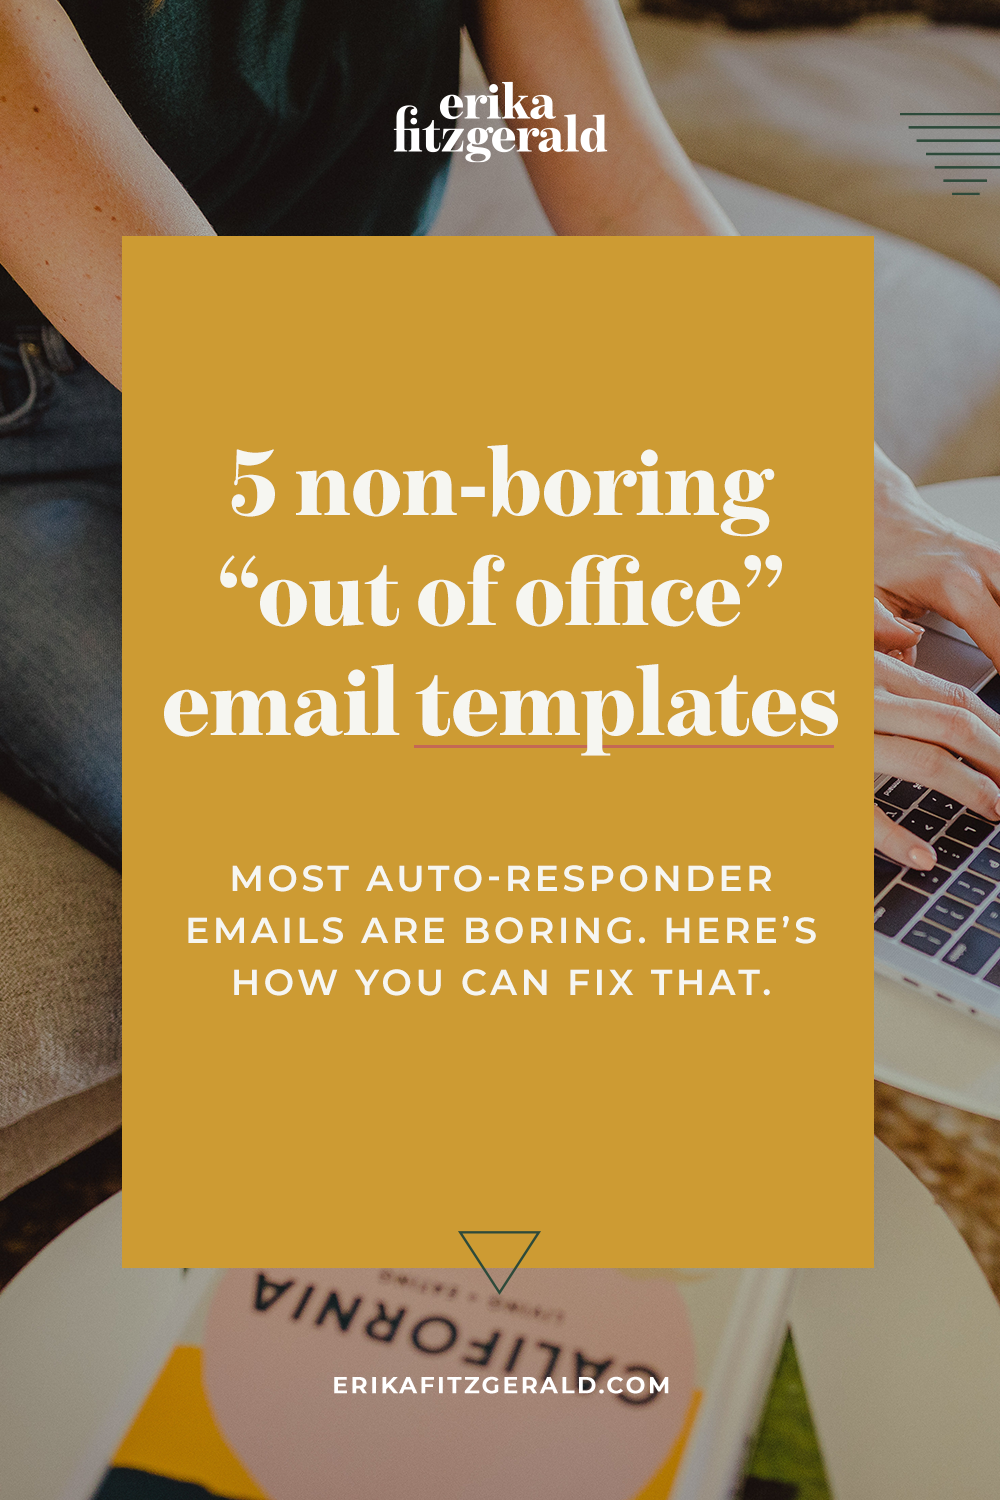 How to write an engaging auto-responder email